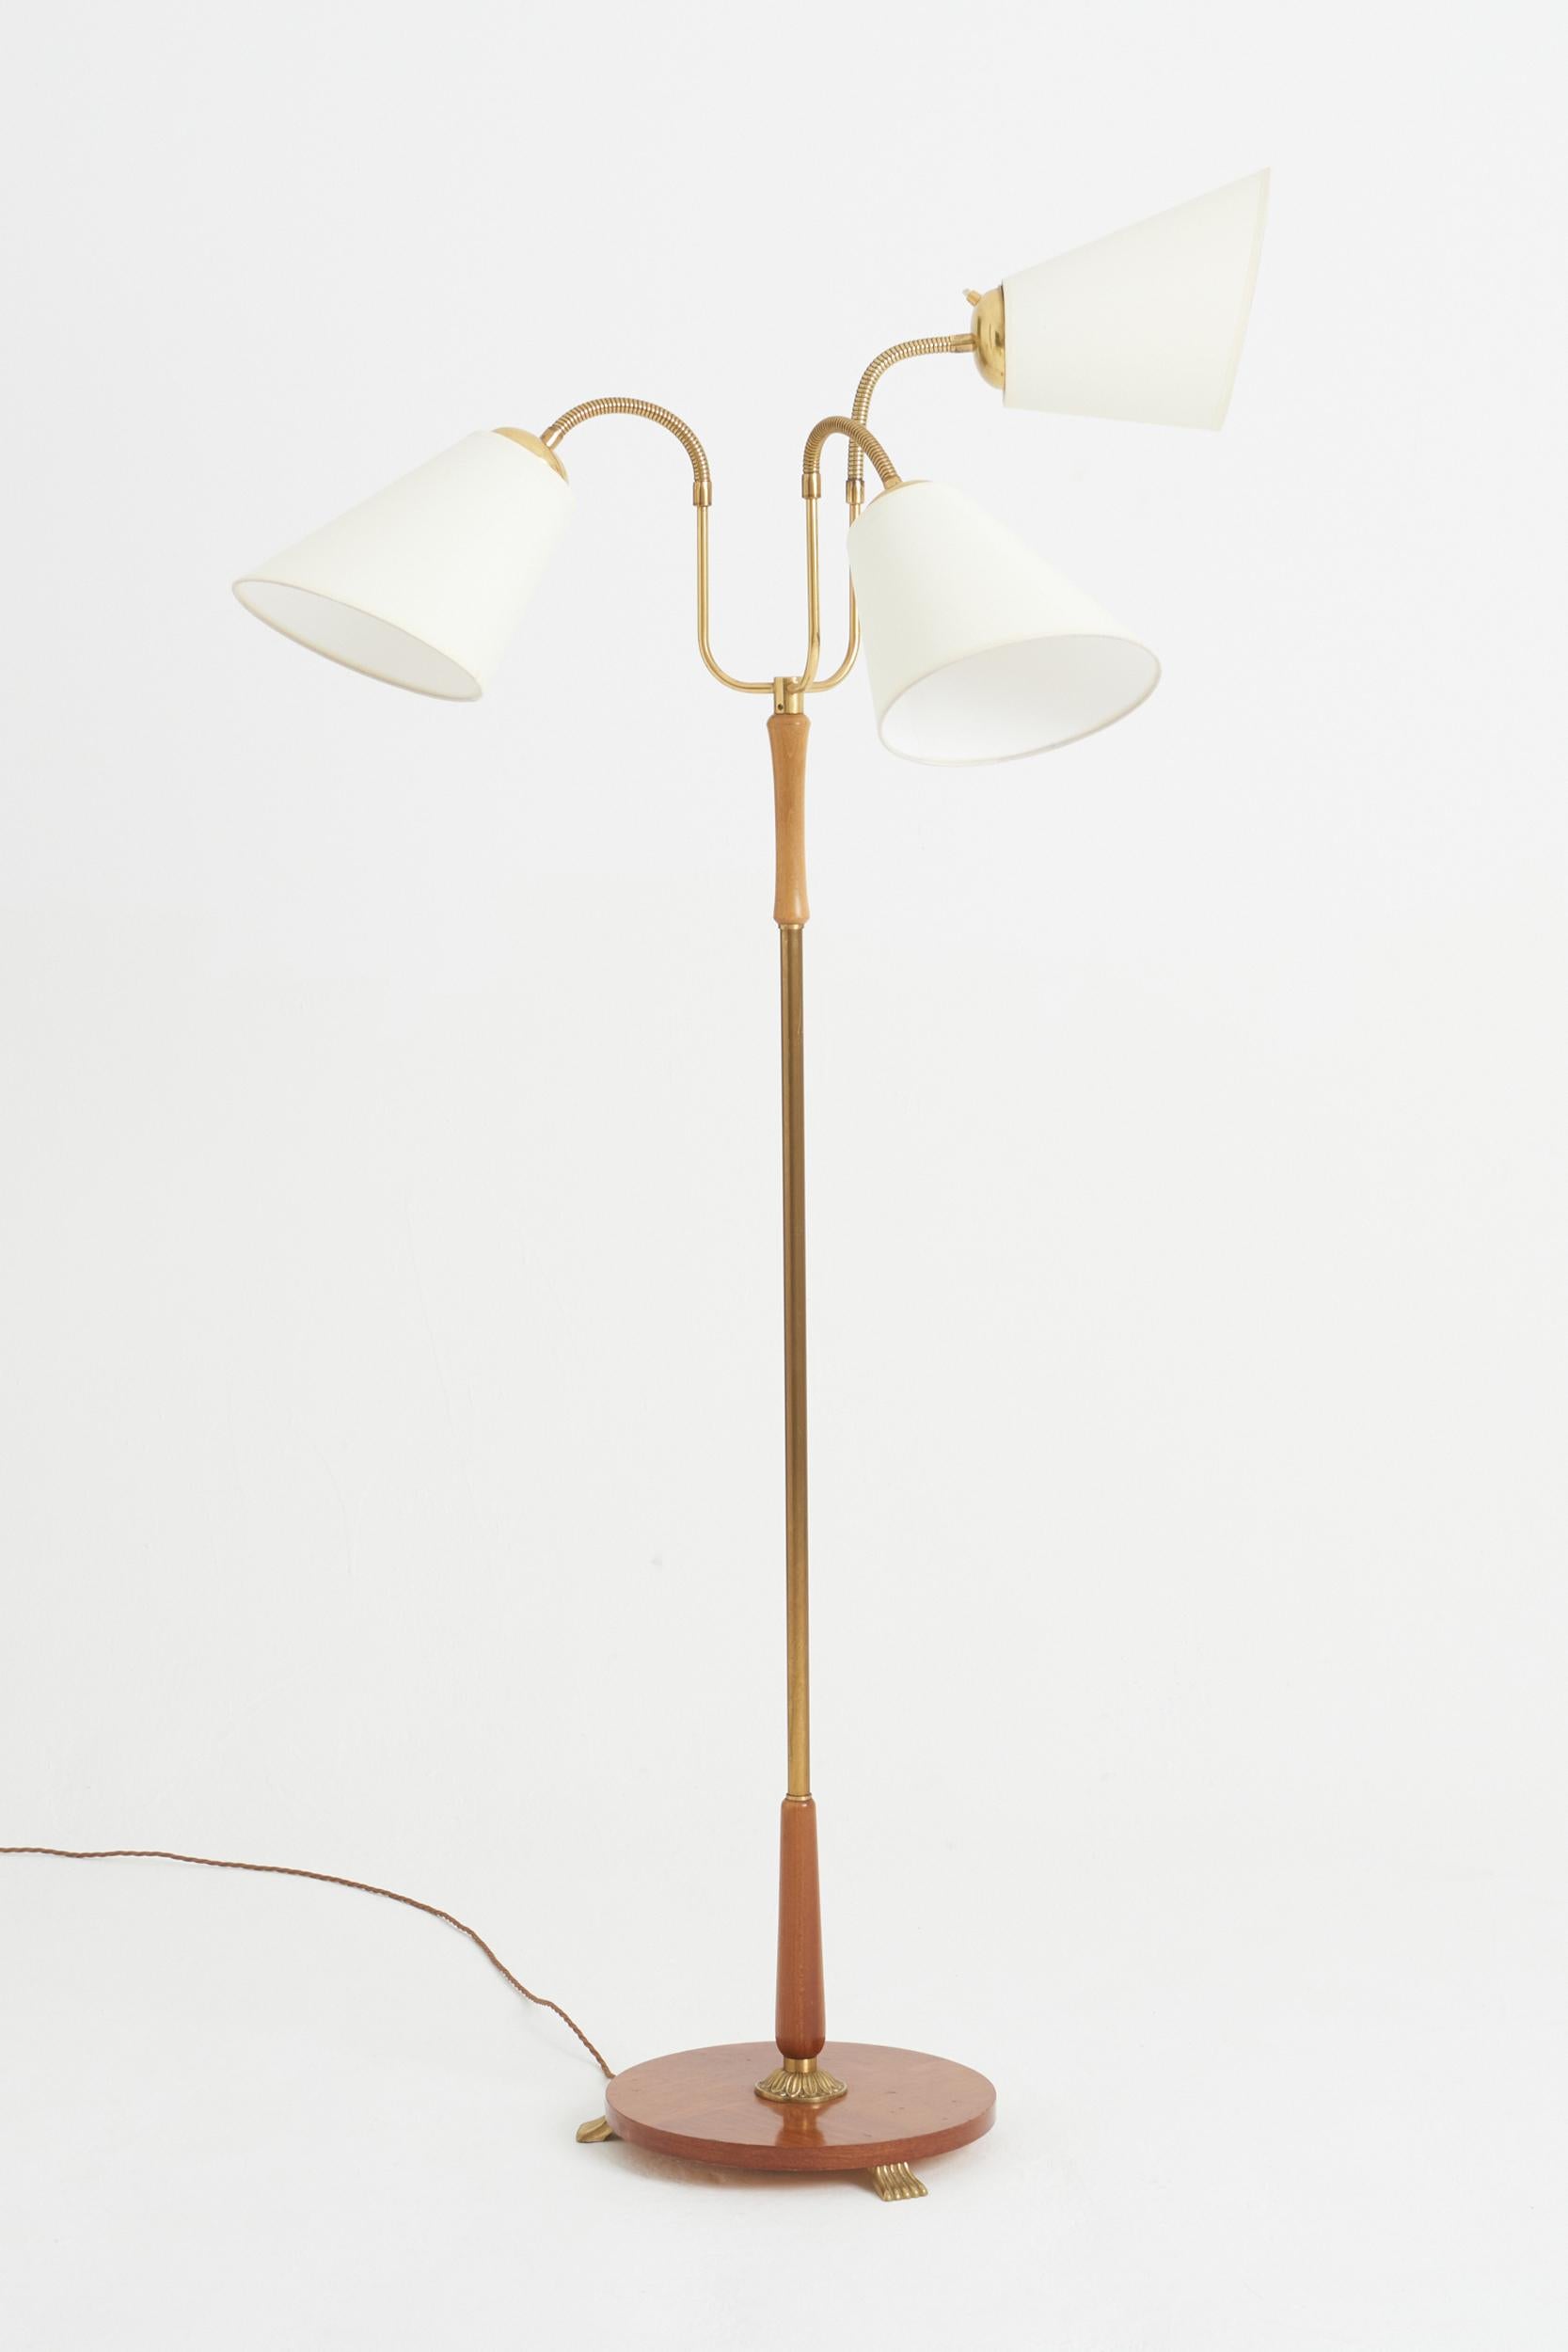 A brass and mahogany veneered three-armed floor lamp.
Sweden, 1940s
180 cm high by 70 cm wide by 70 cm depth